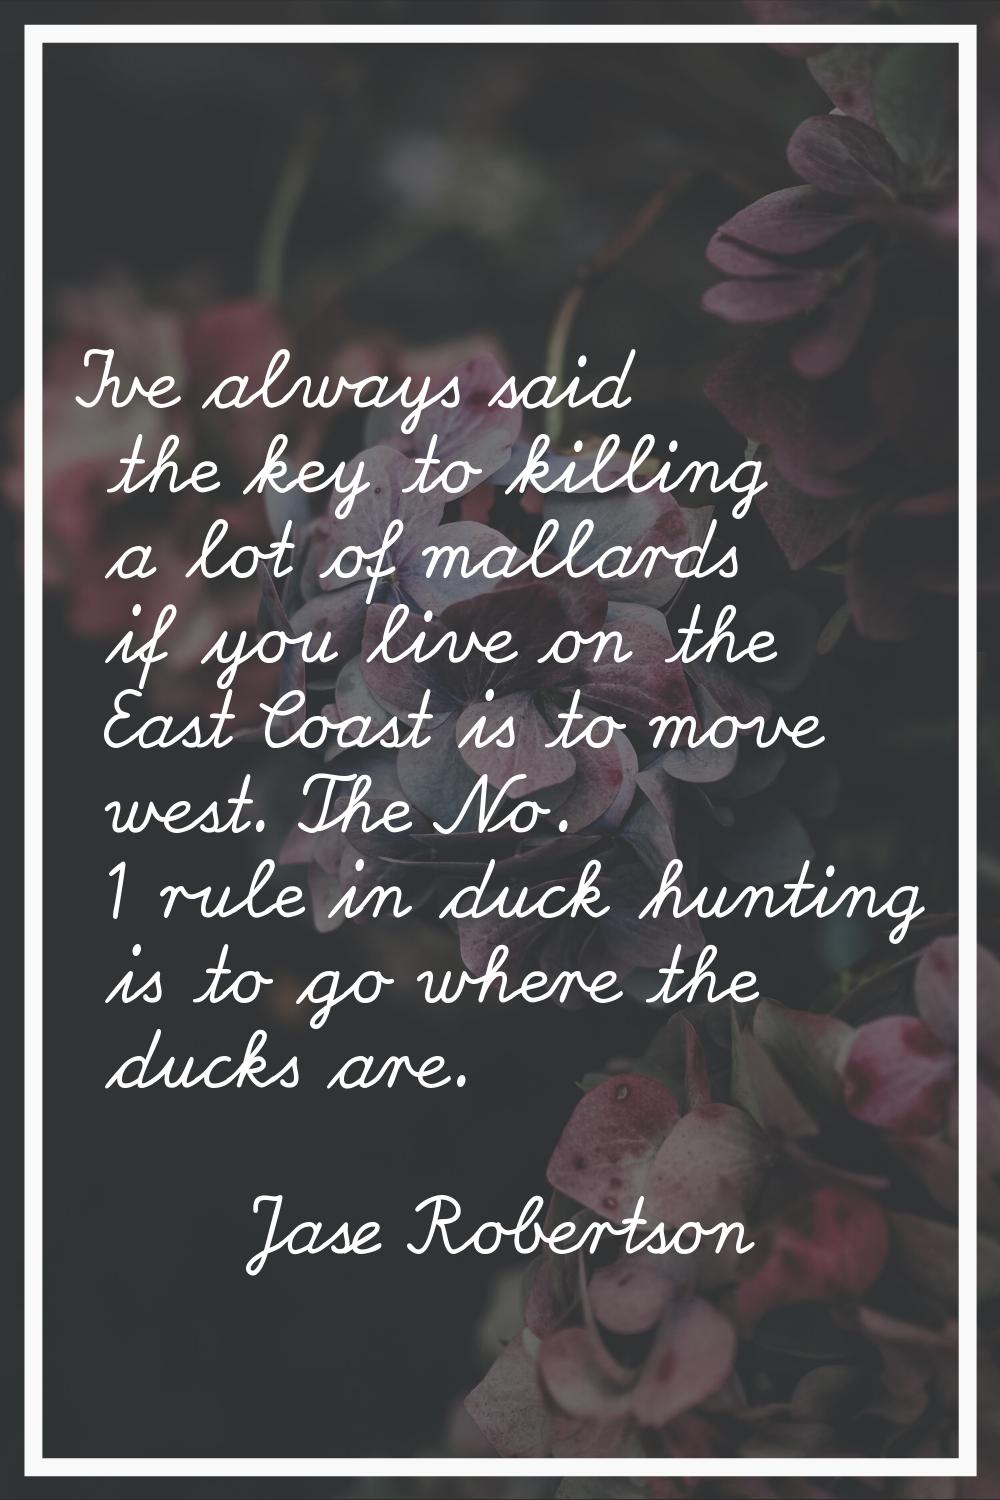 I've always said the key to killing a lot of mallards if you live on the East Coast is to move west